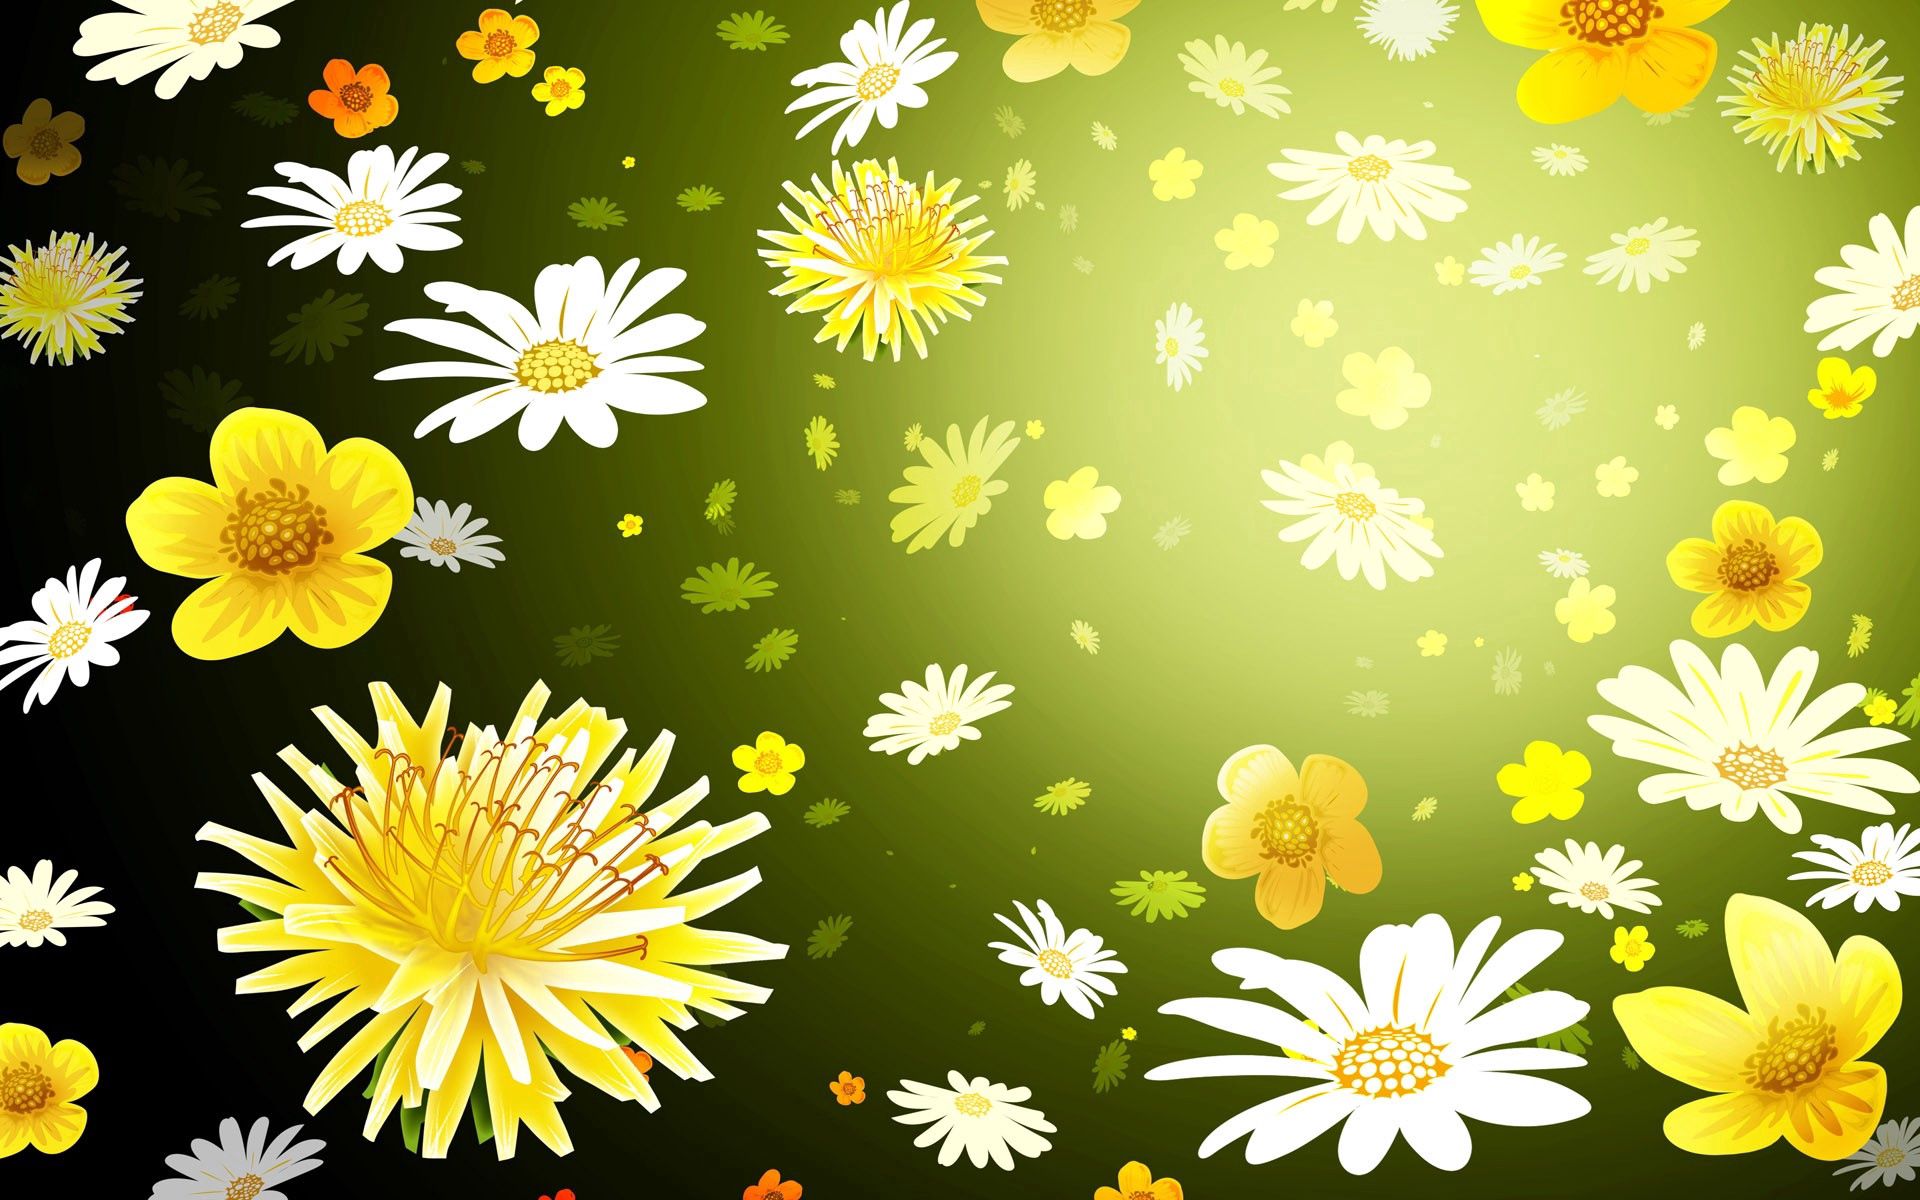 background, flowers, dandelions, camomile, texture, textures, picture, drawing FHD, 4K, UHD